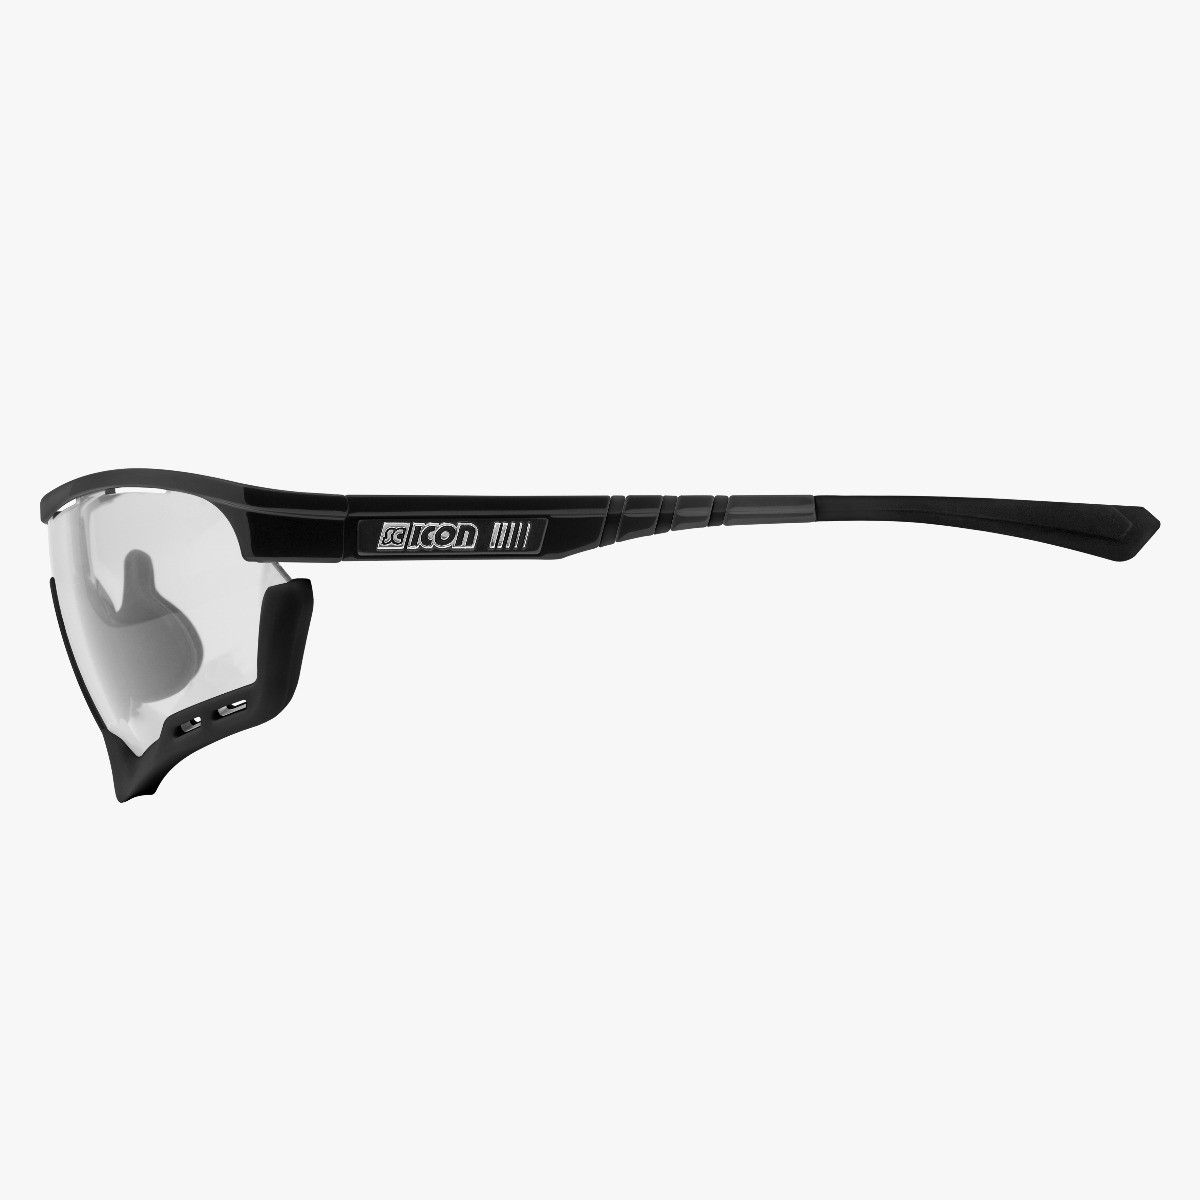 Scicon Sports | Aerotech Sport Cycling Performance Sunglasses - Black Gloss / Photocromatic Bronze - EY13170201